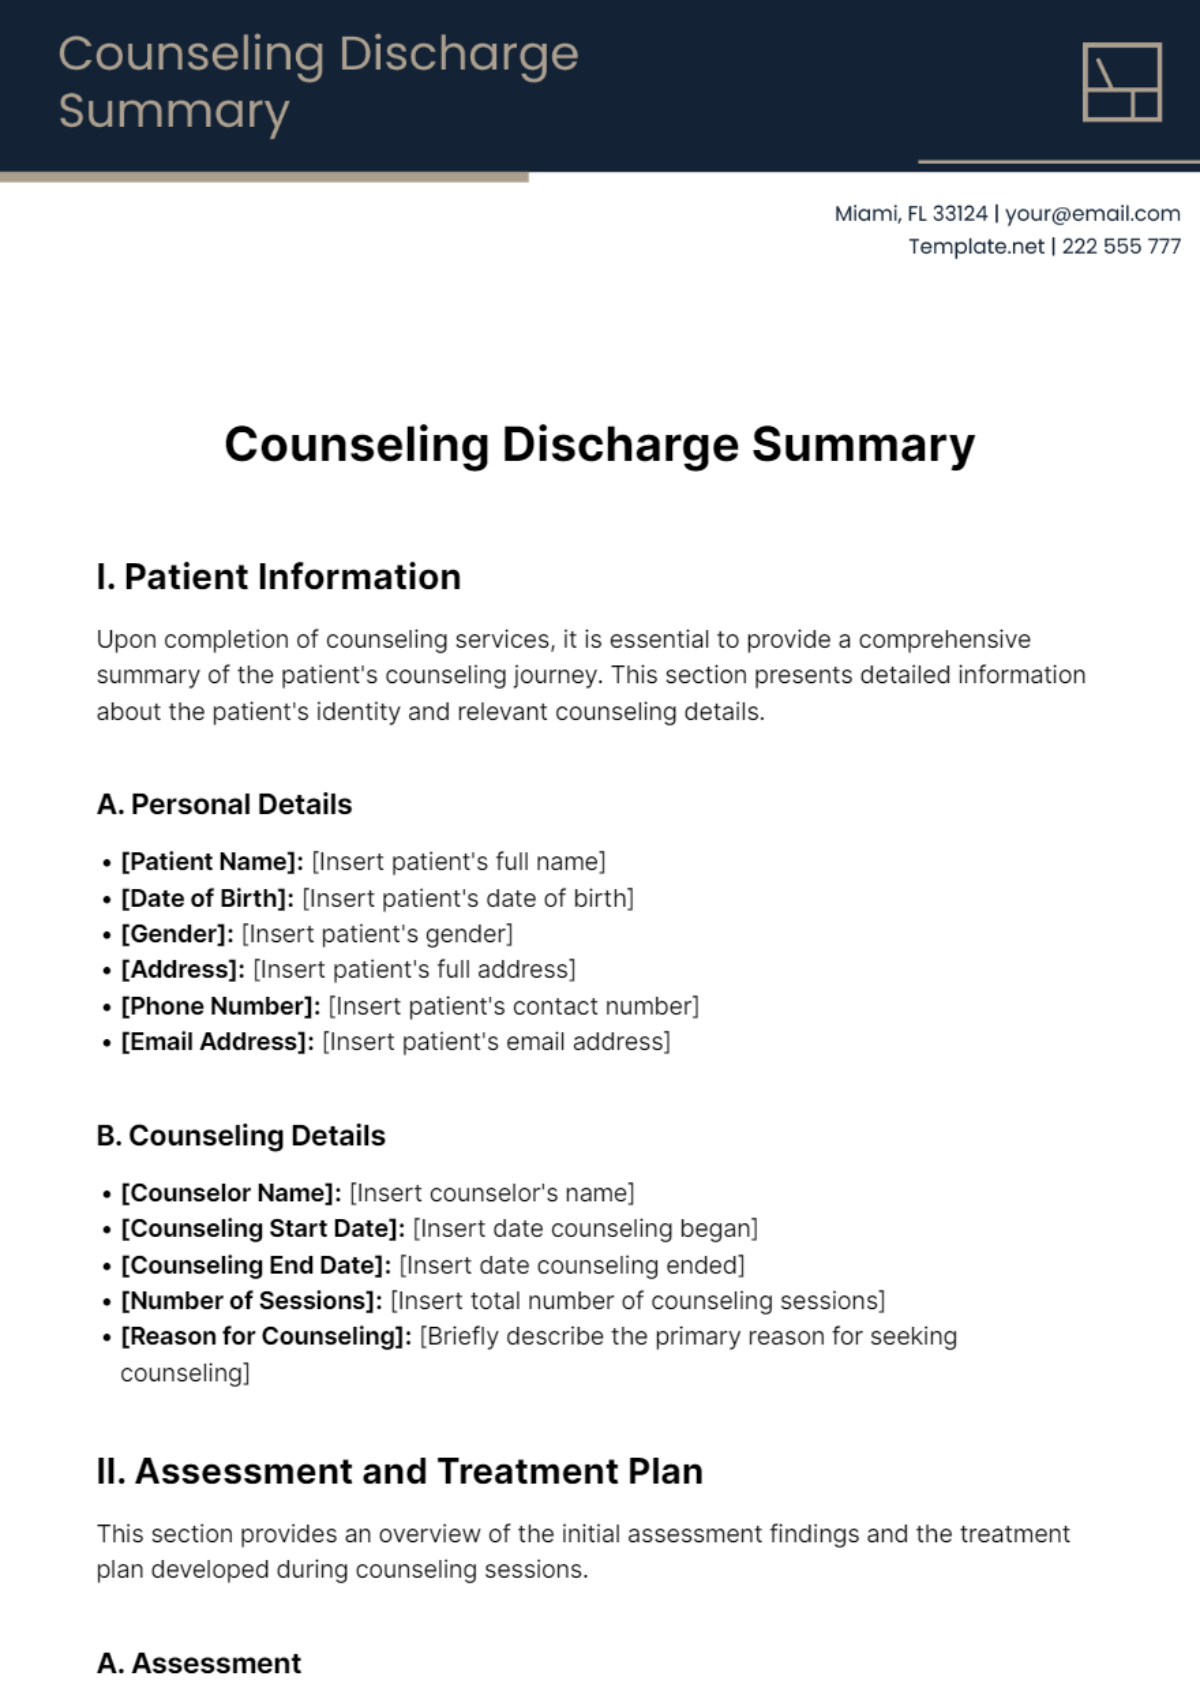 Counseling Discharge Summary Template